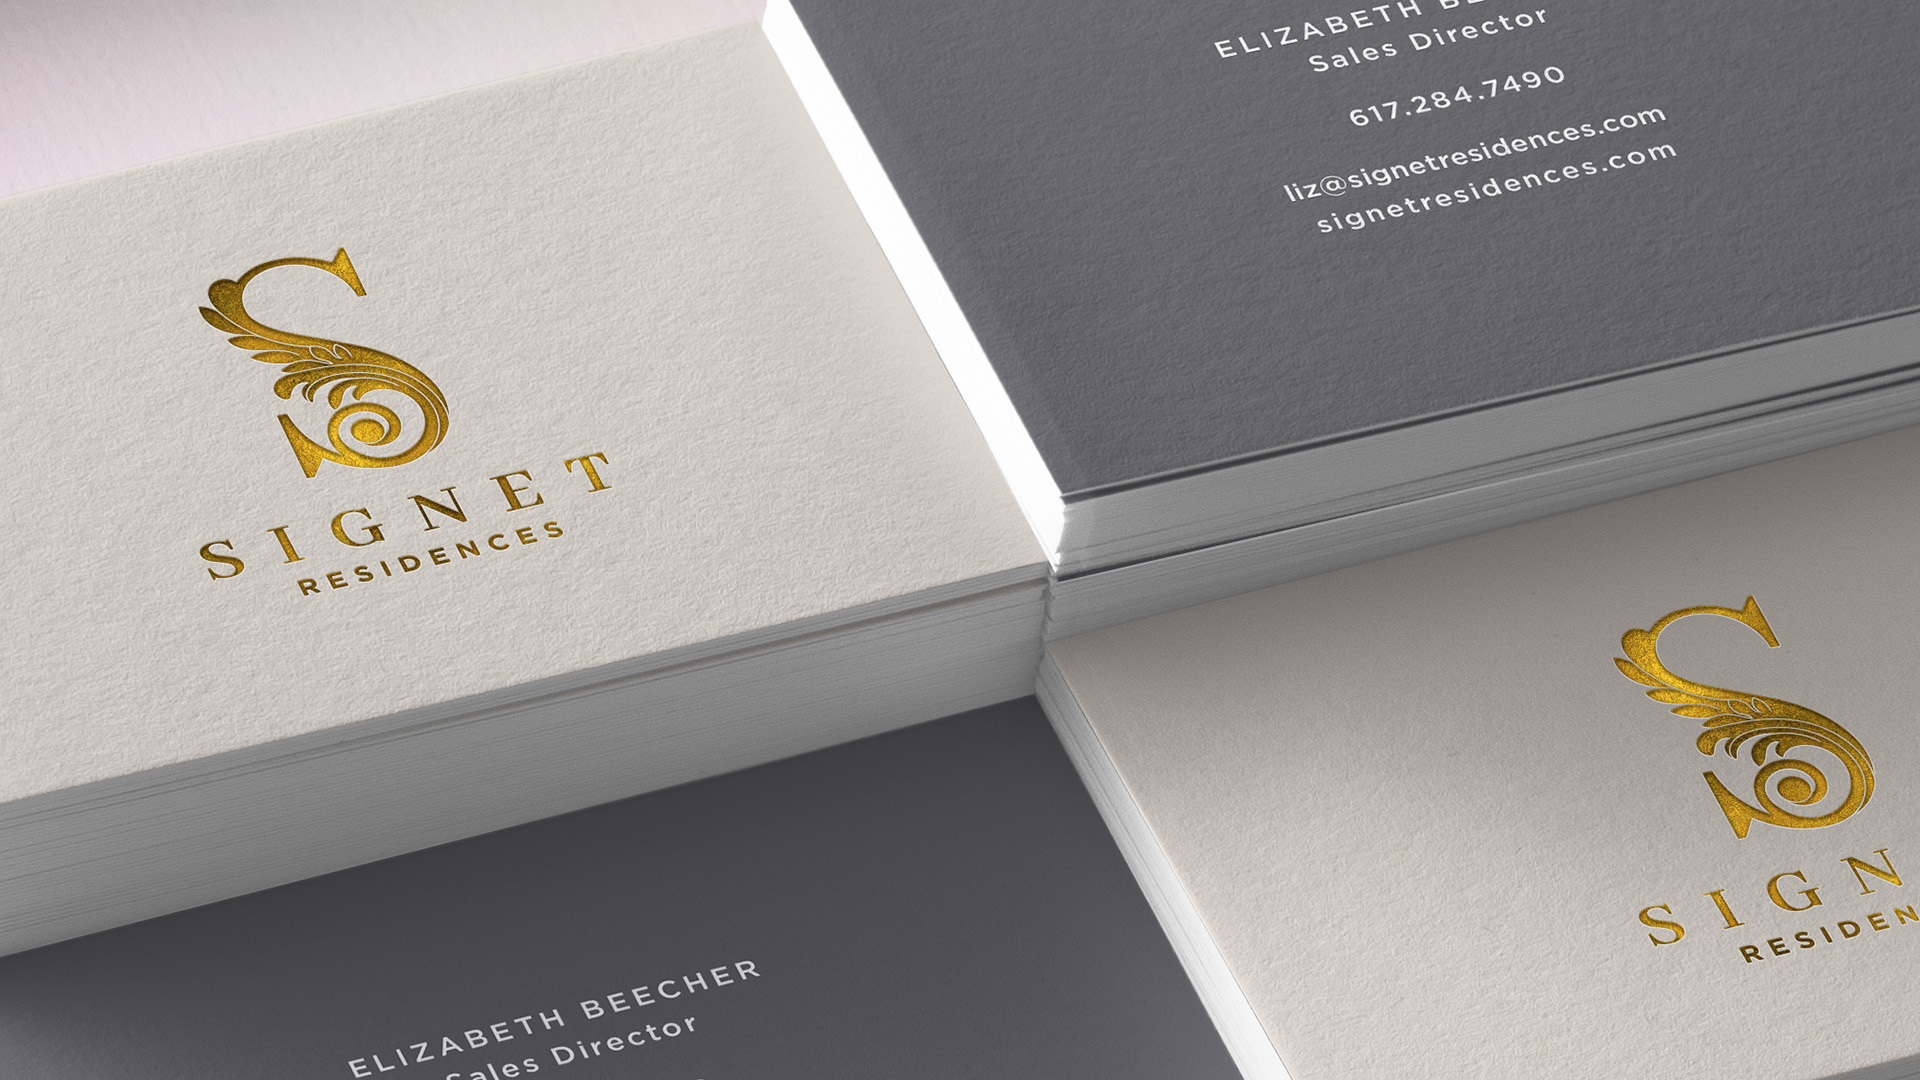 signet business cards with gold foil by best boston graphic design agency